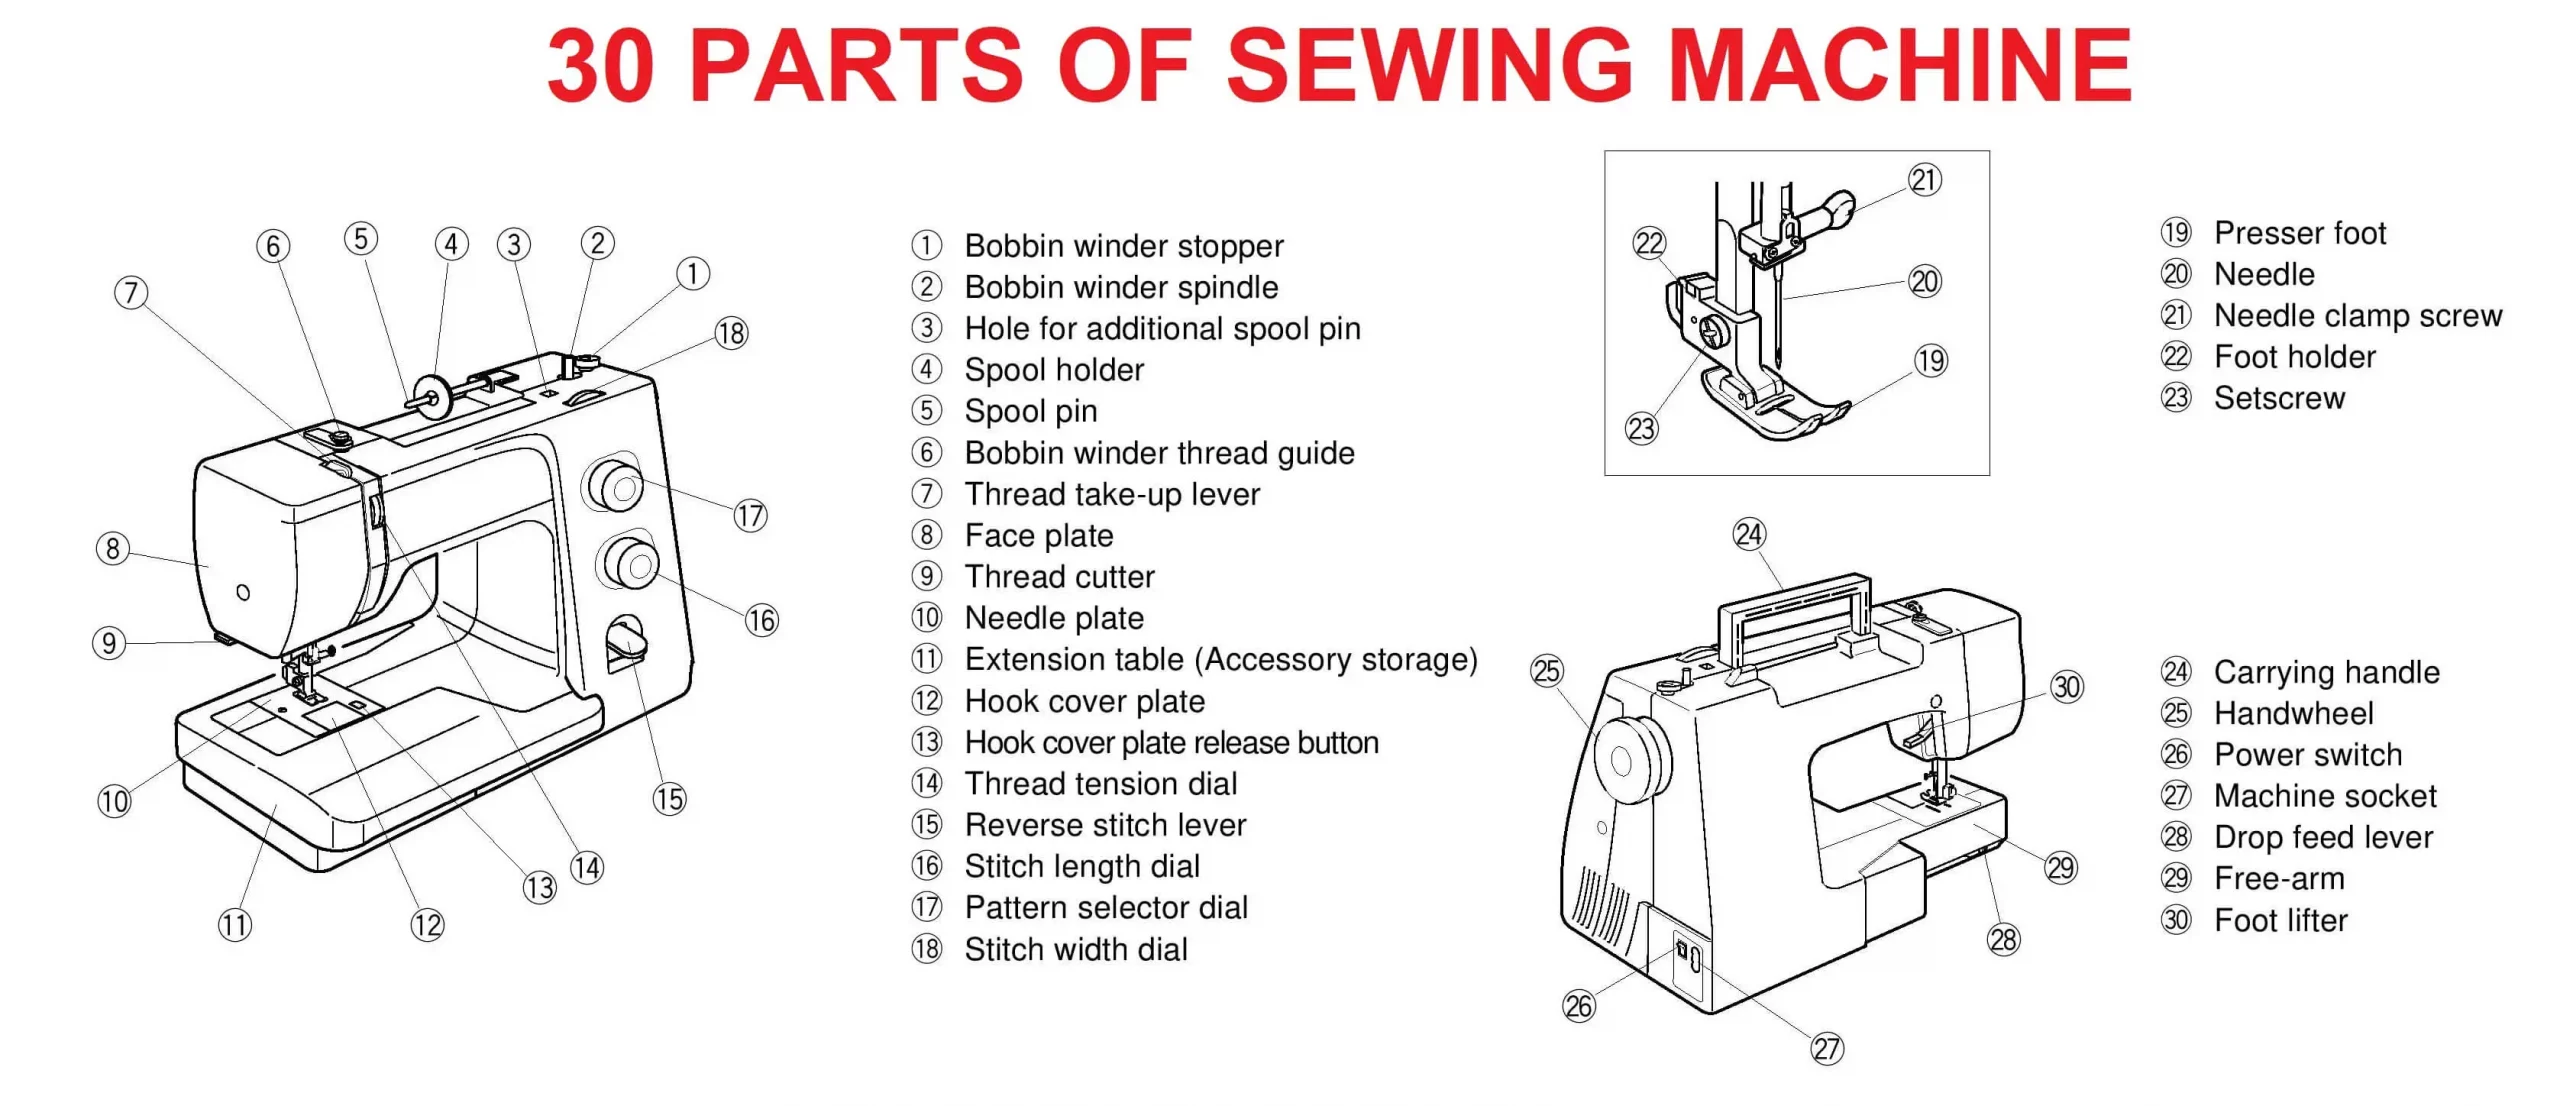 30 Parts of Sewing Machine and Their Functions with Pictures - ORDNUR